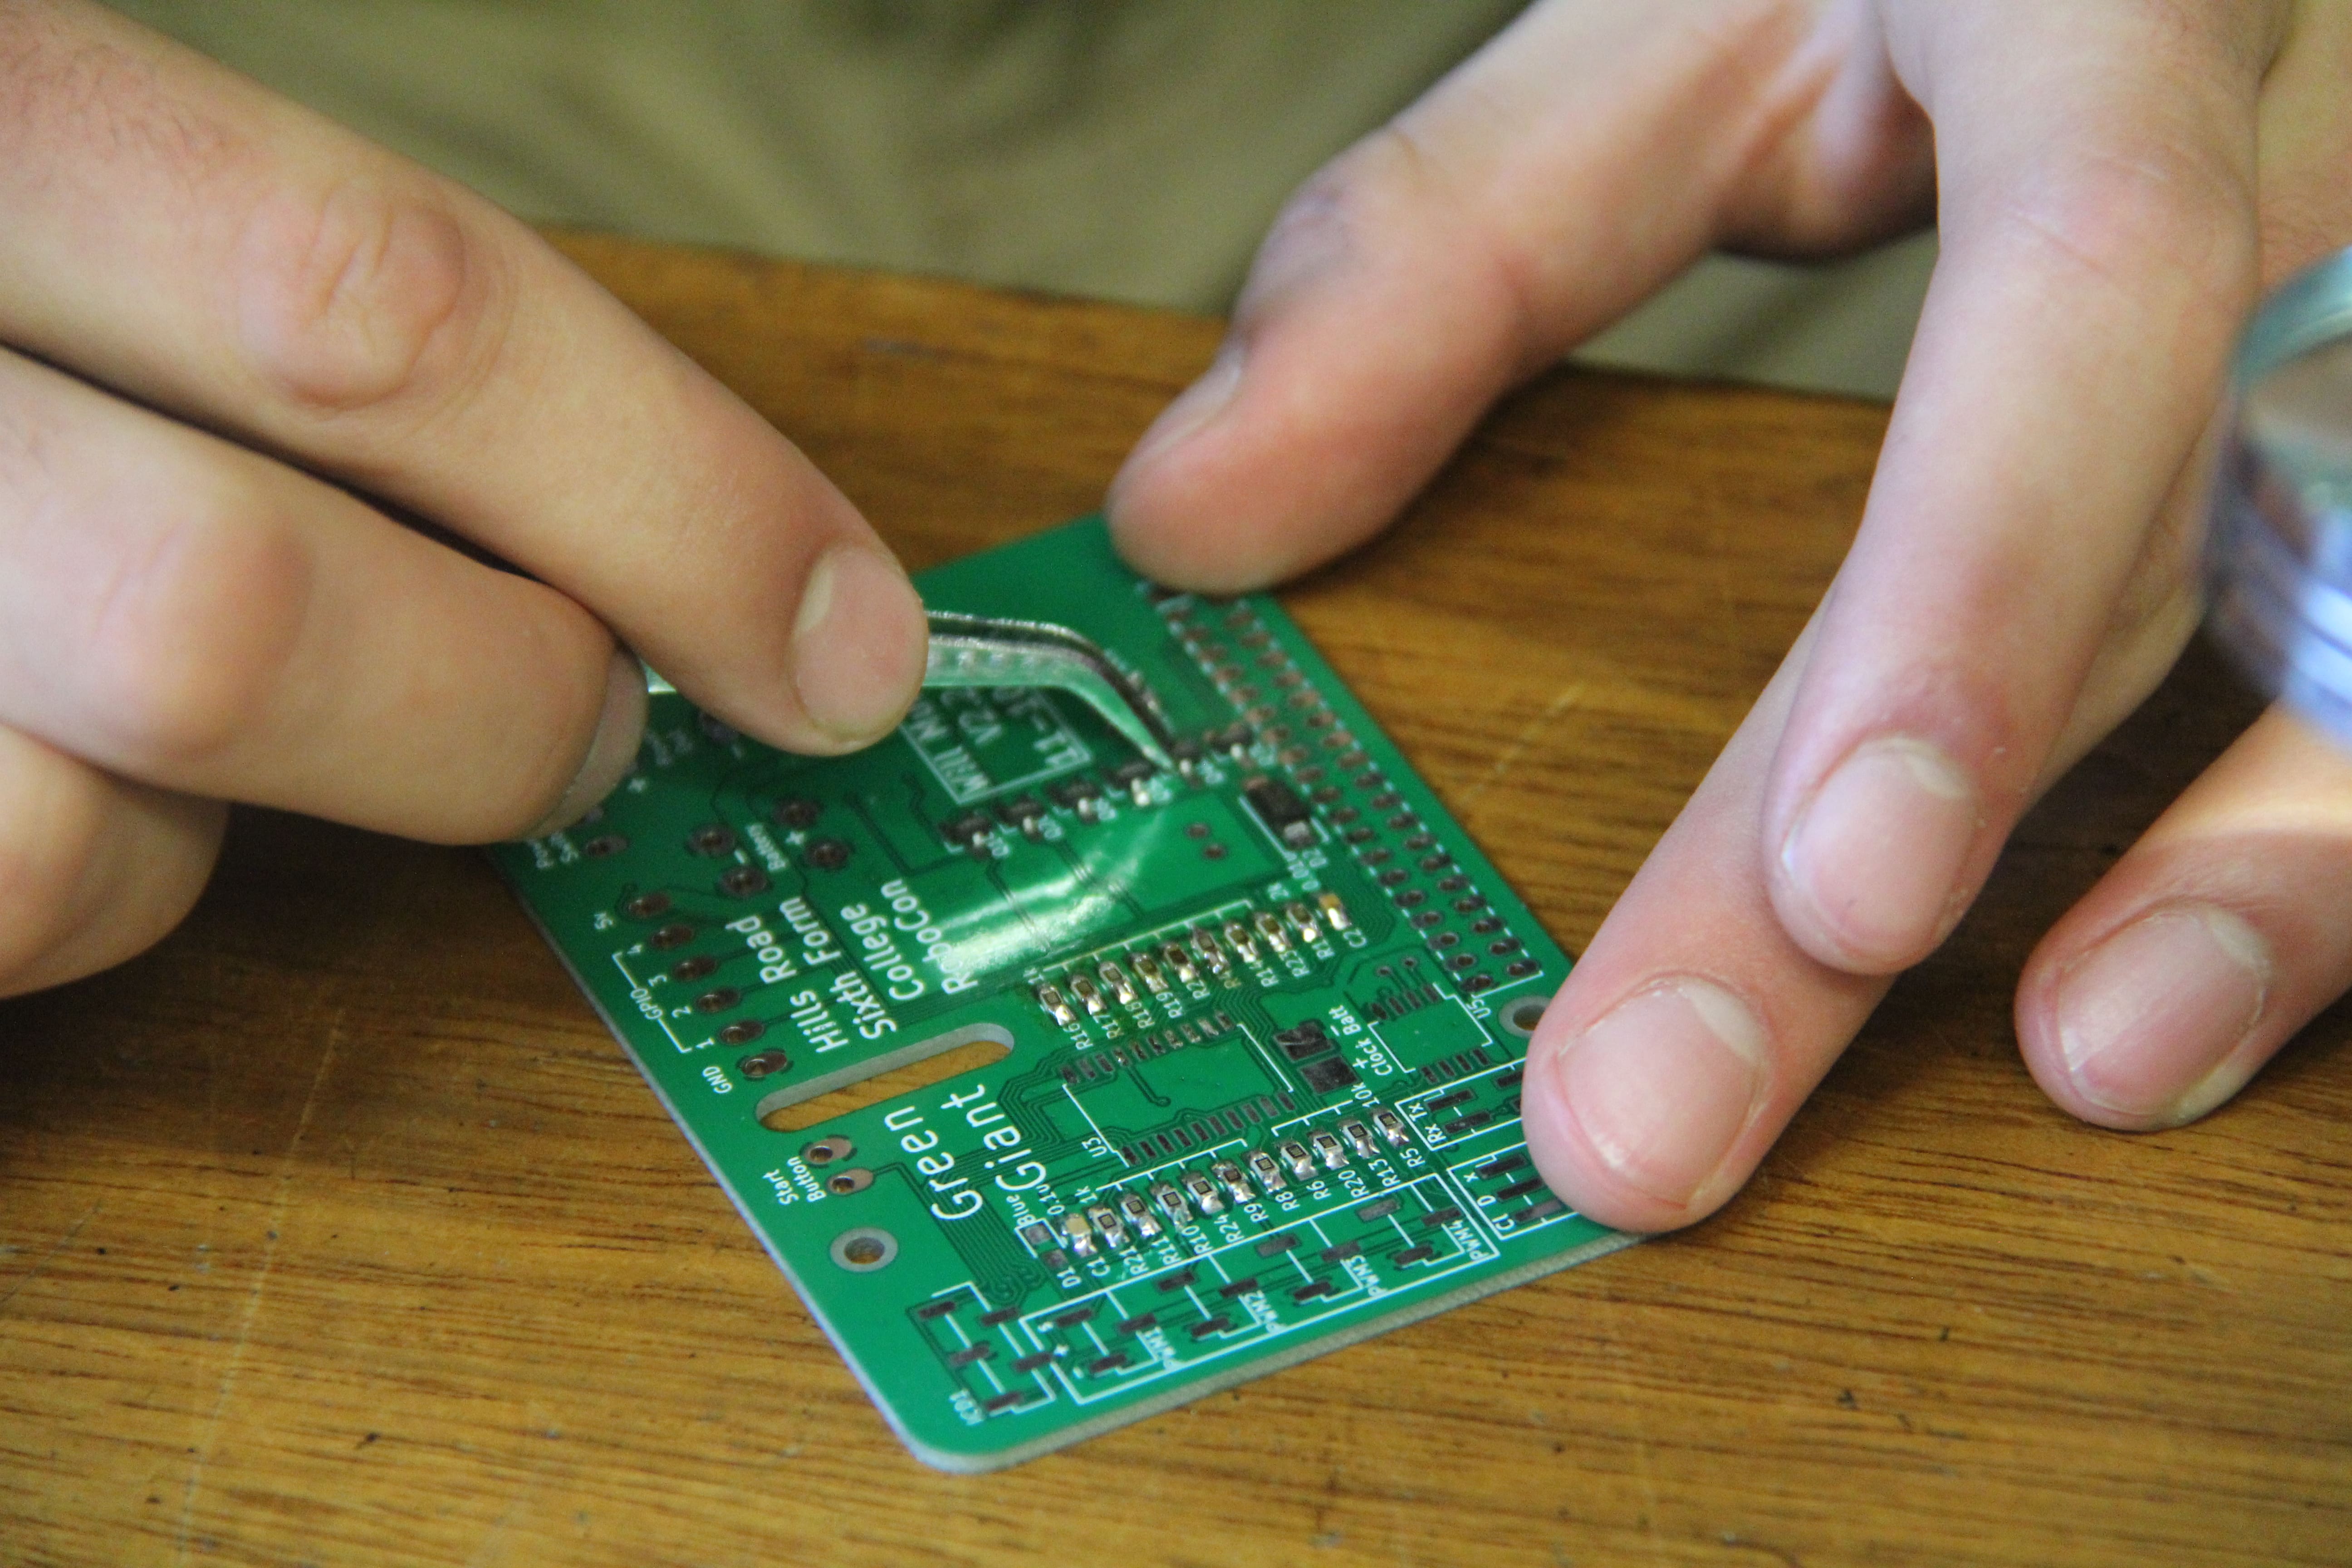 Soldering components to the board